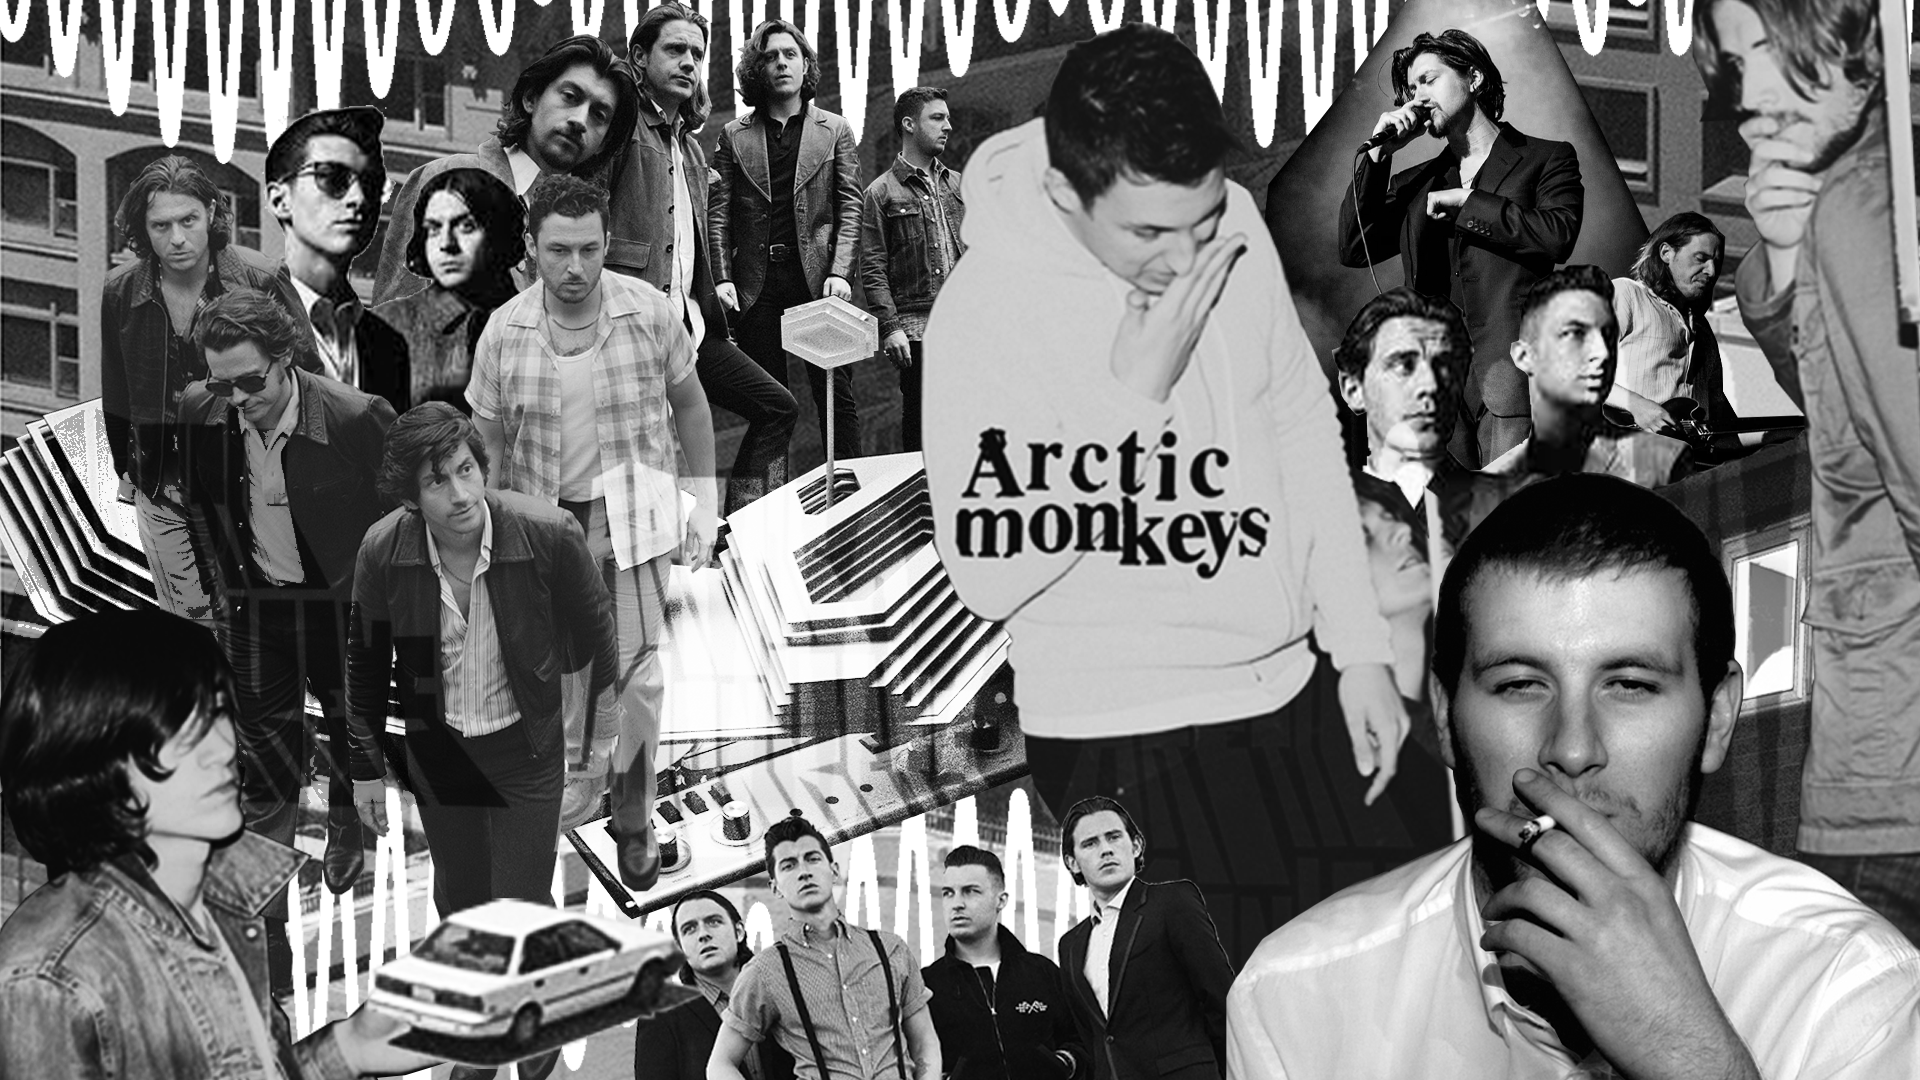 Arctic Monkeys talk about how far they've come, changes in their music